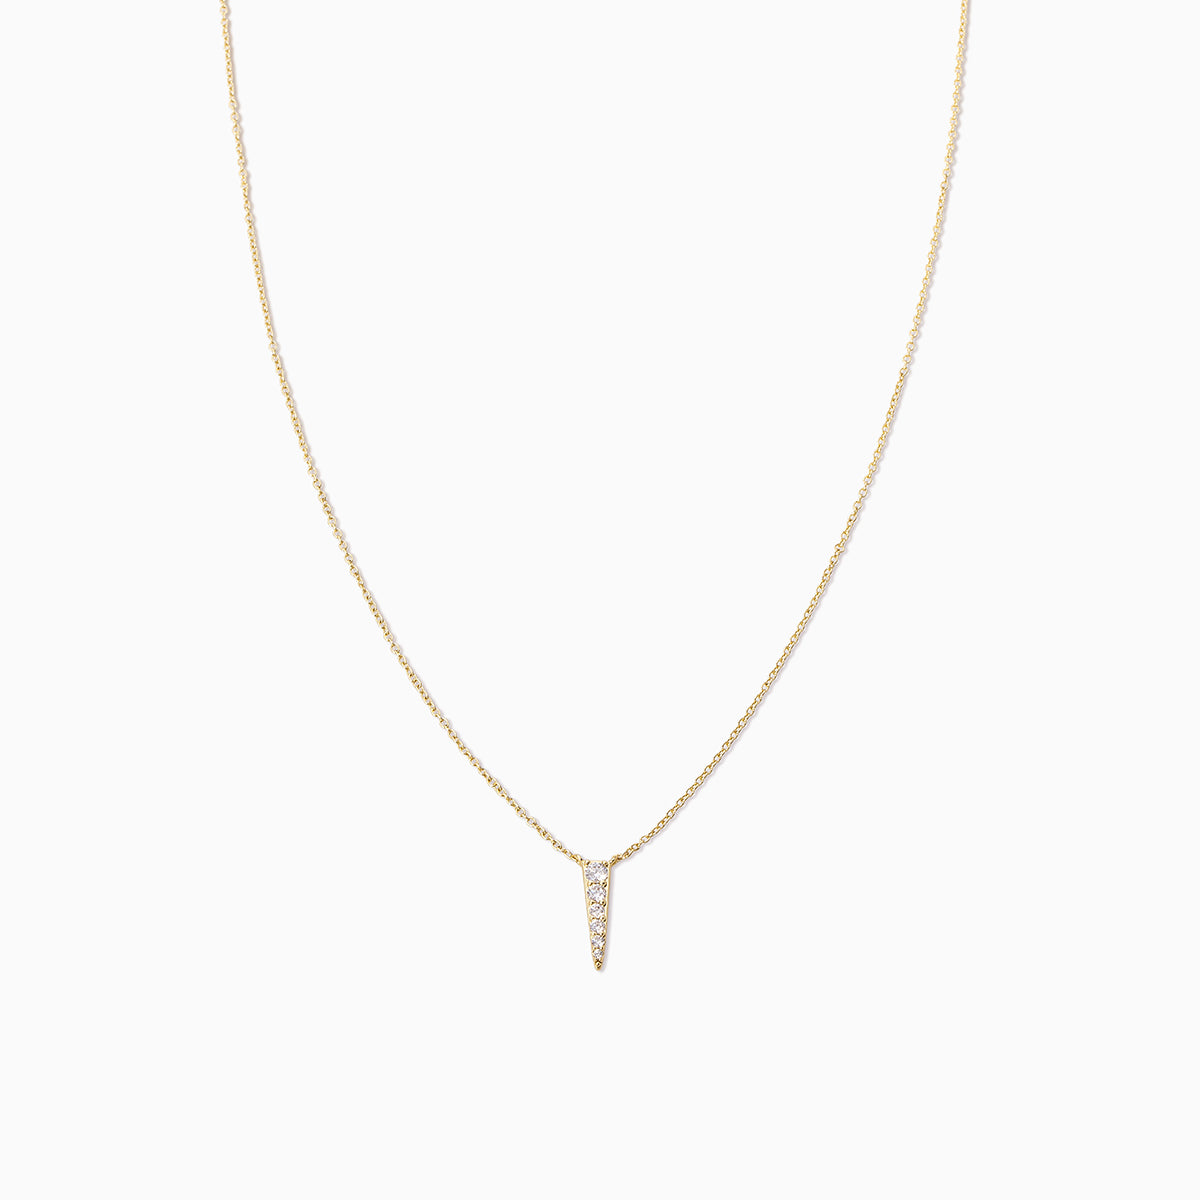 Cutting Edge Necklace | Gold | Product Image | Uncommon James